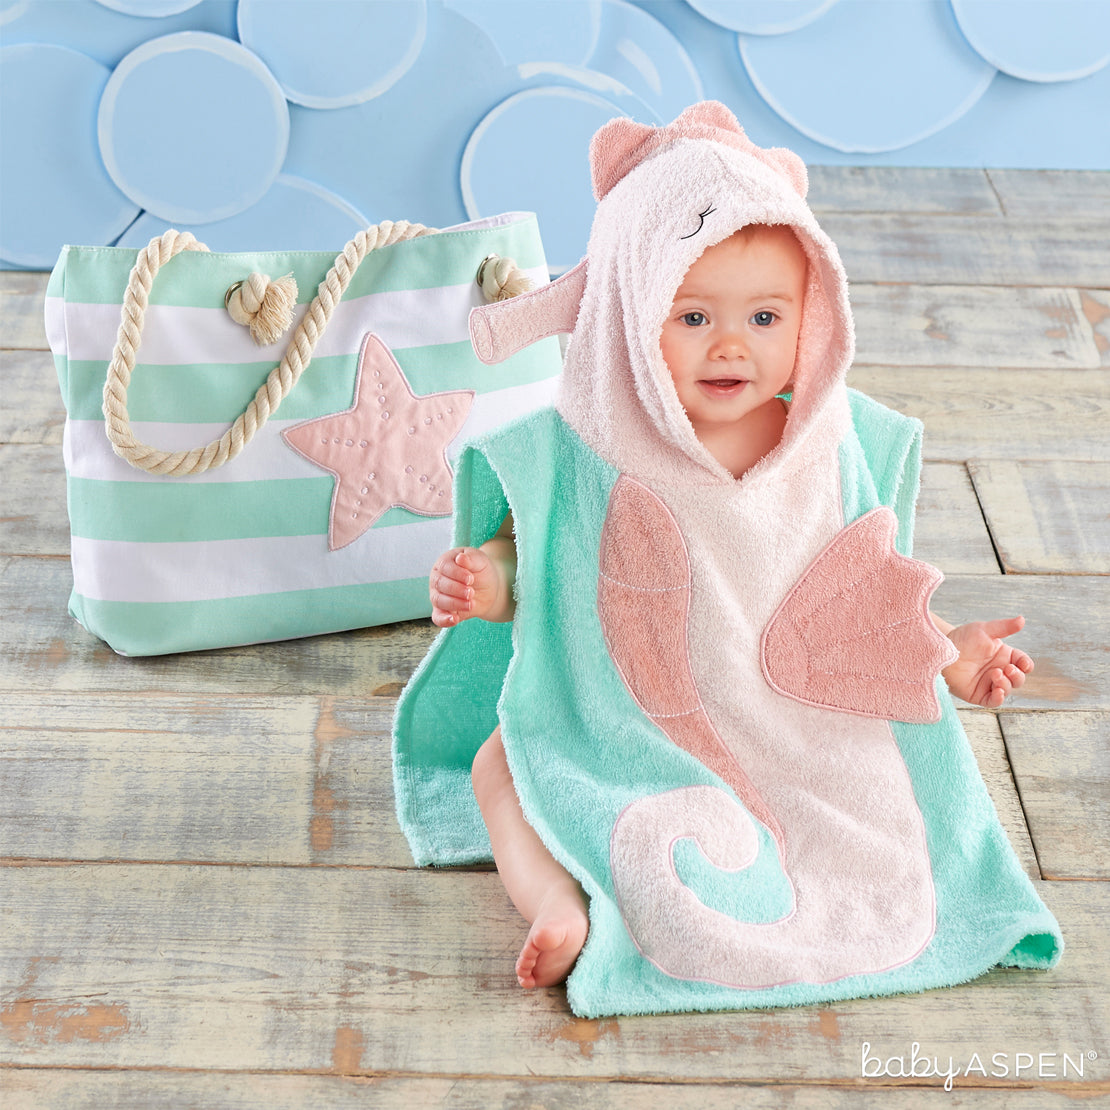 Seahorse 4-Piece Beach Gift Set with Canvas Tote for Mom | Brilliant Beach Baby Gifts + A Giveaway | Baby Aspen